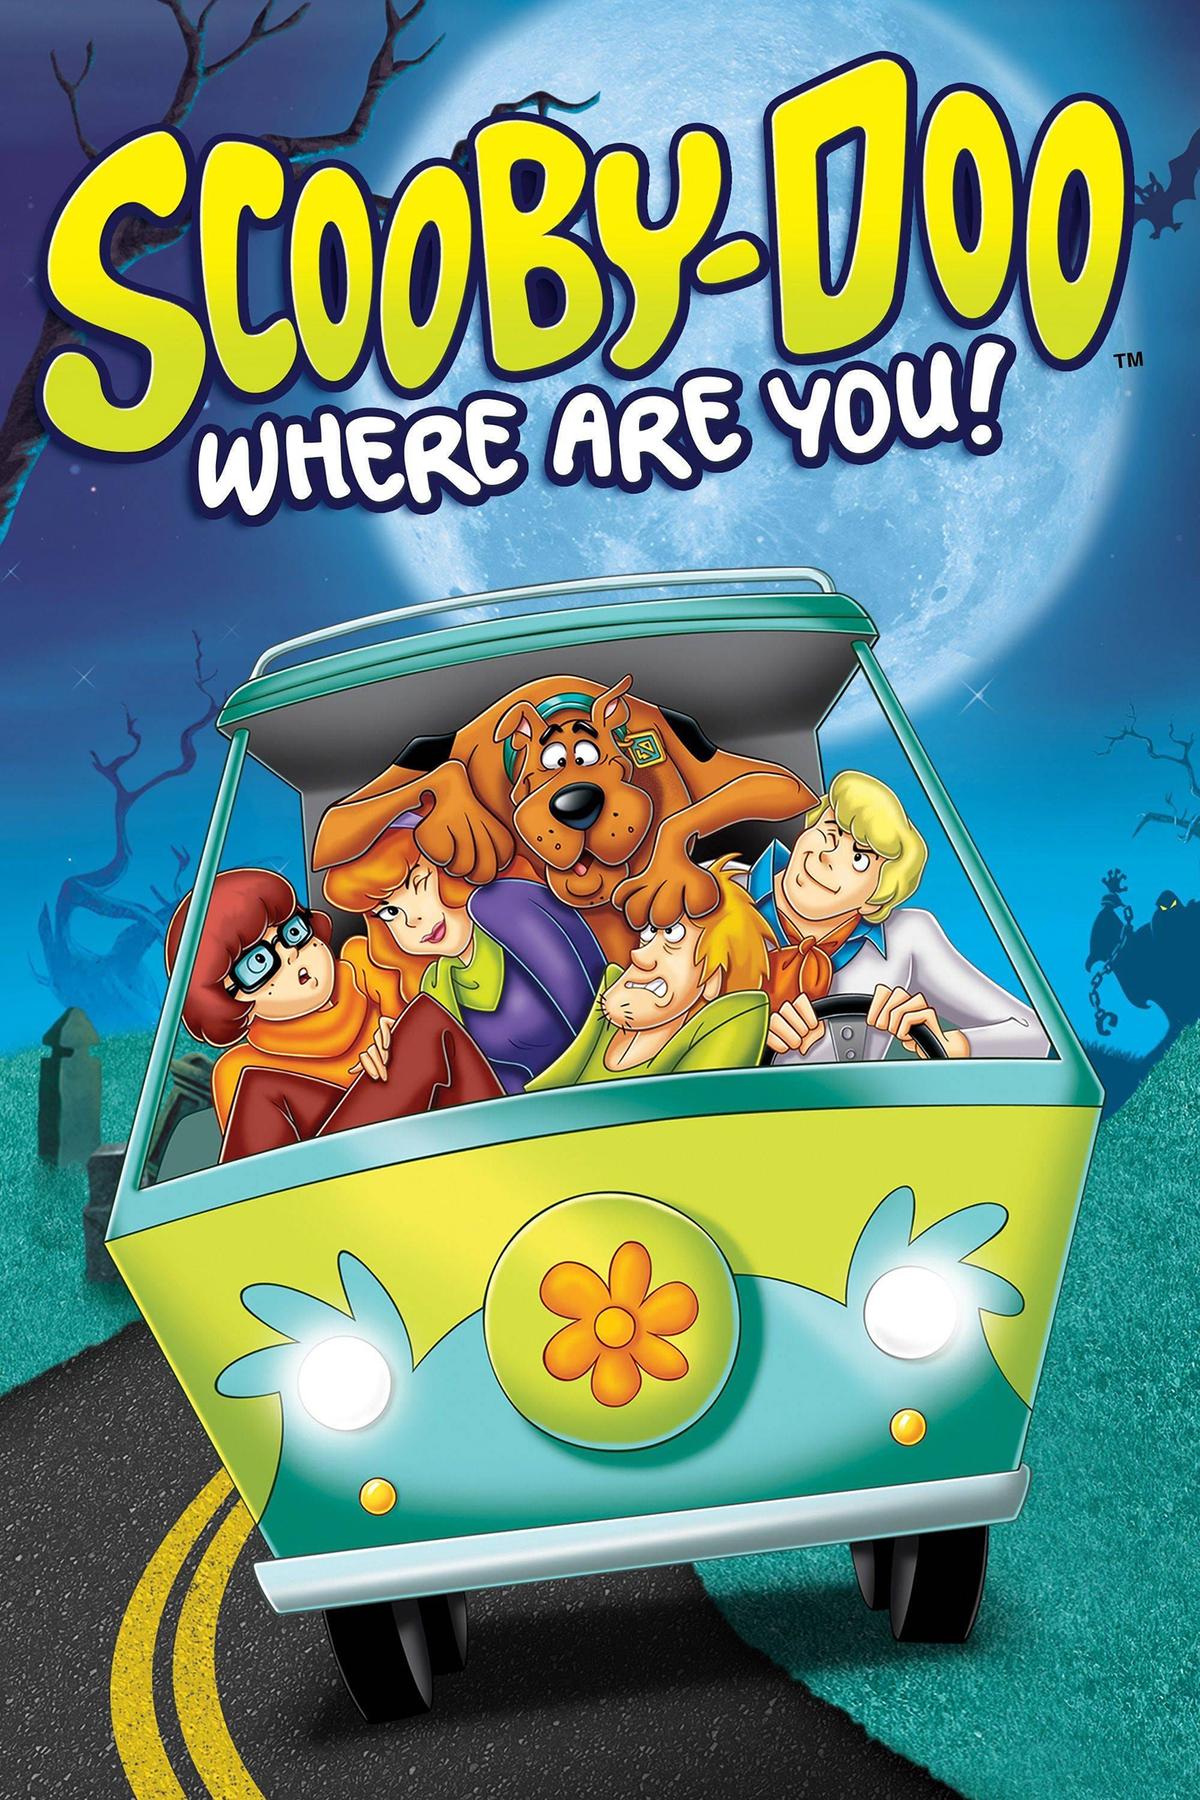 Movie poster for the Hanna-Barbera Production "Scooby-Doo, Where Are You!," in 1969. (CBS)